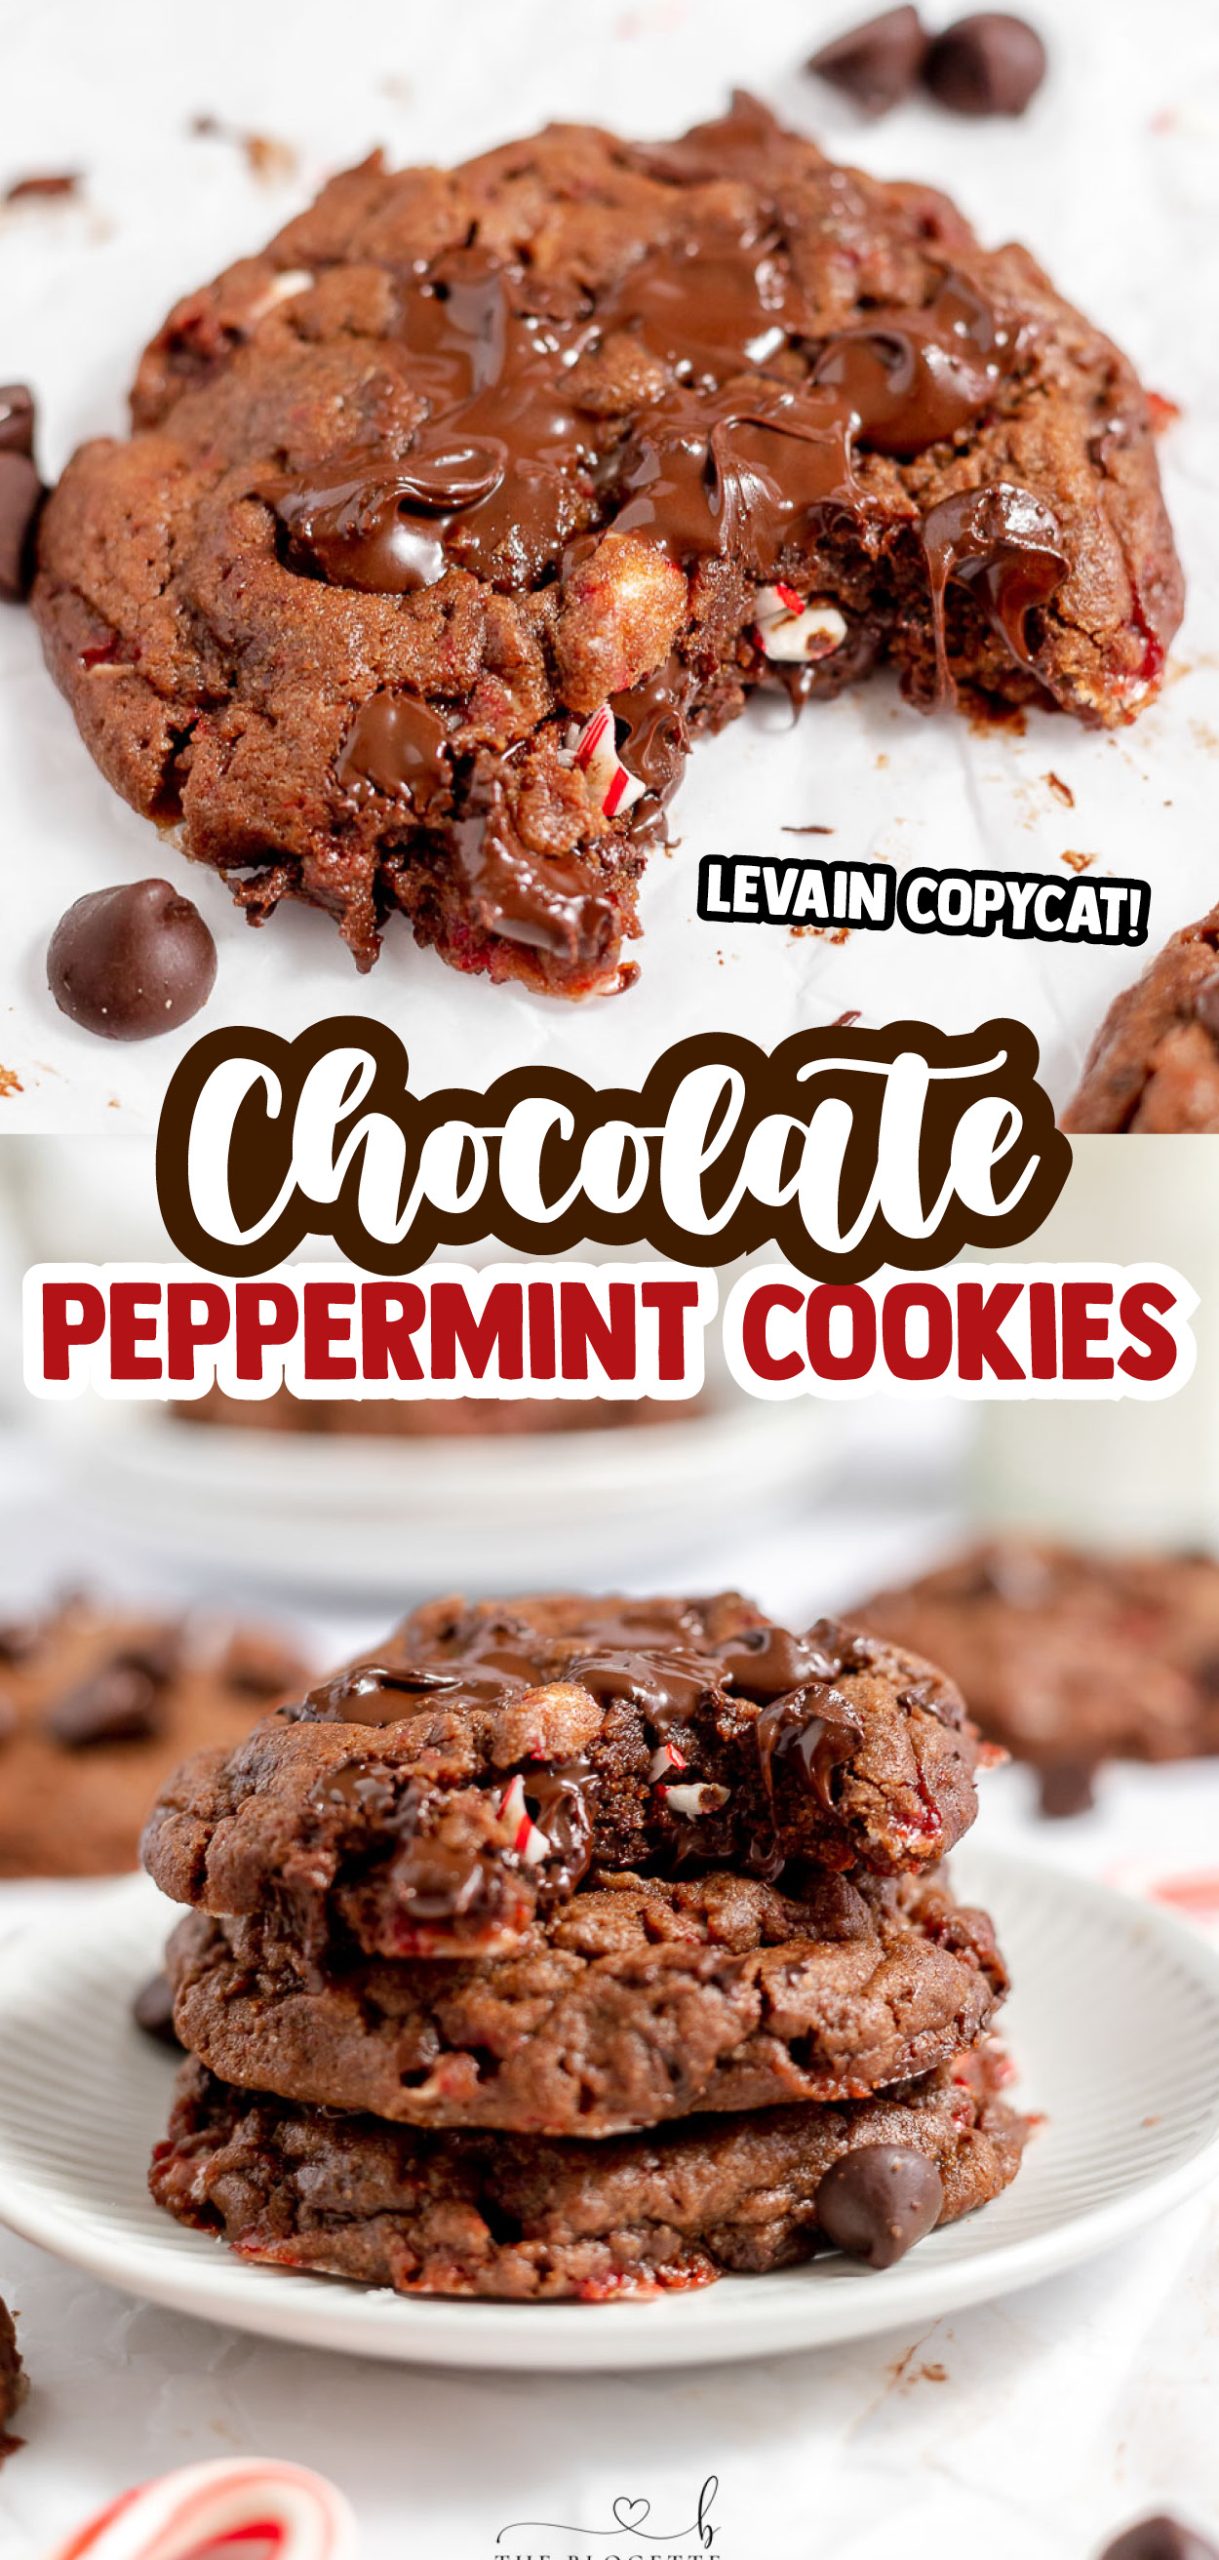 Dark Chocolate Peppermint Cookies are just like the luxe Levain Bakery recipe! Candy canes in the dark and rich chocolate dough make this an extra special Christmas cookie. Every bite gives you that warming, holiday feeling! 